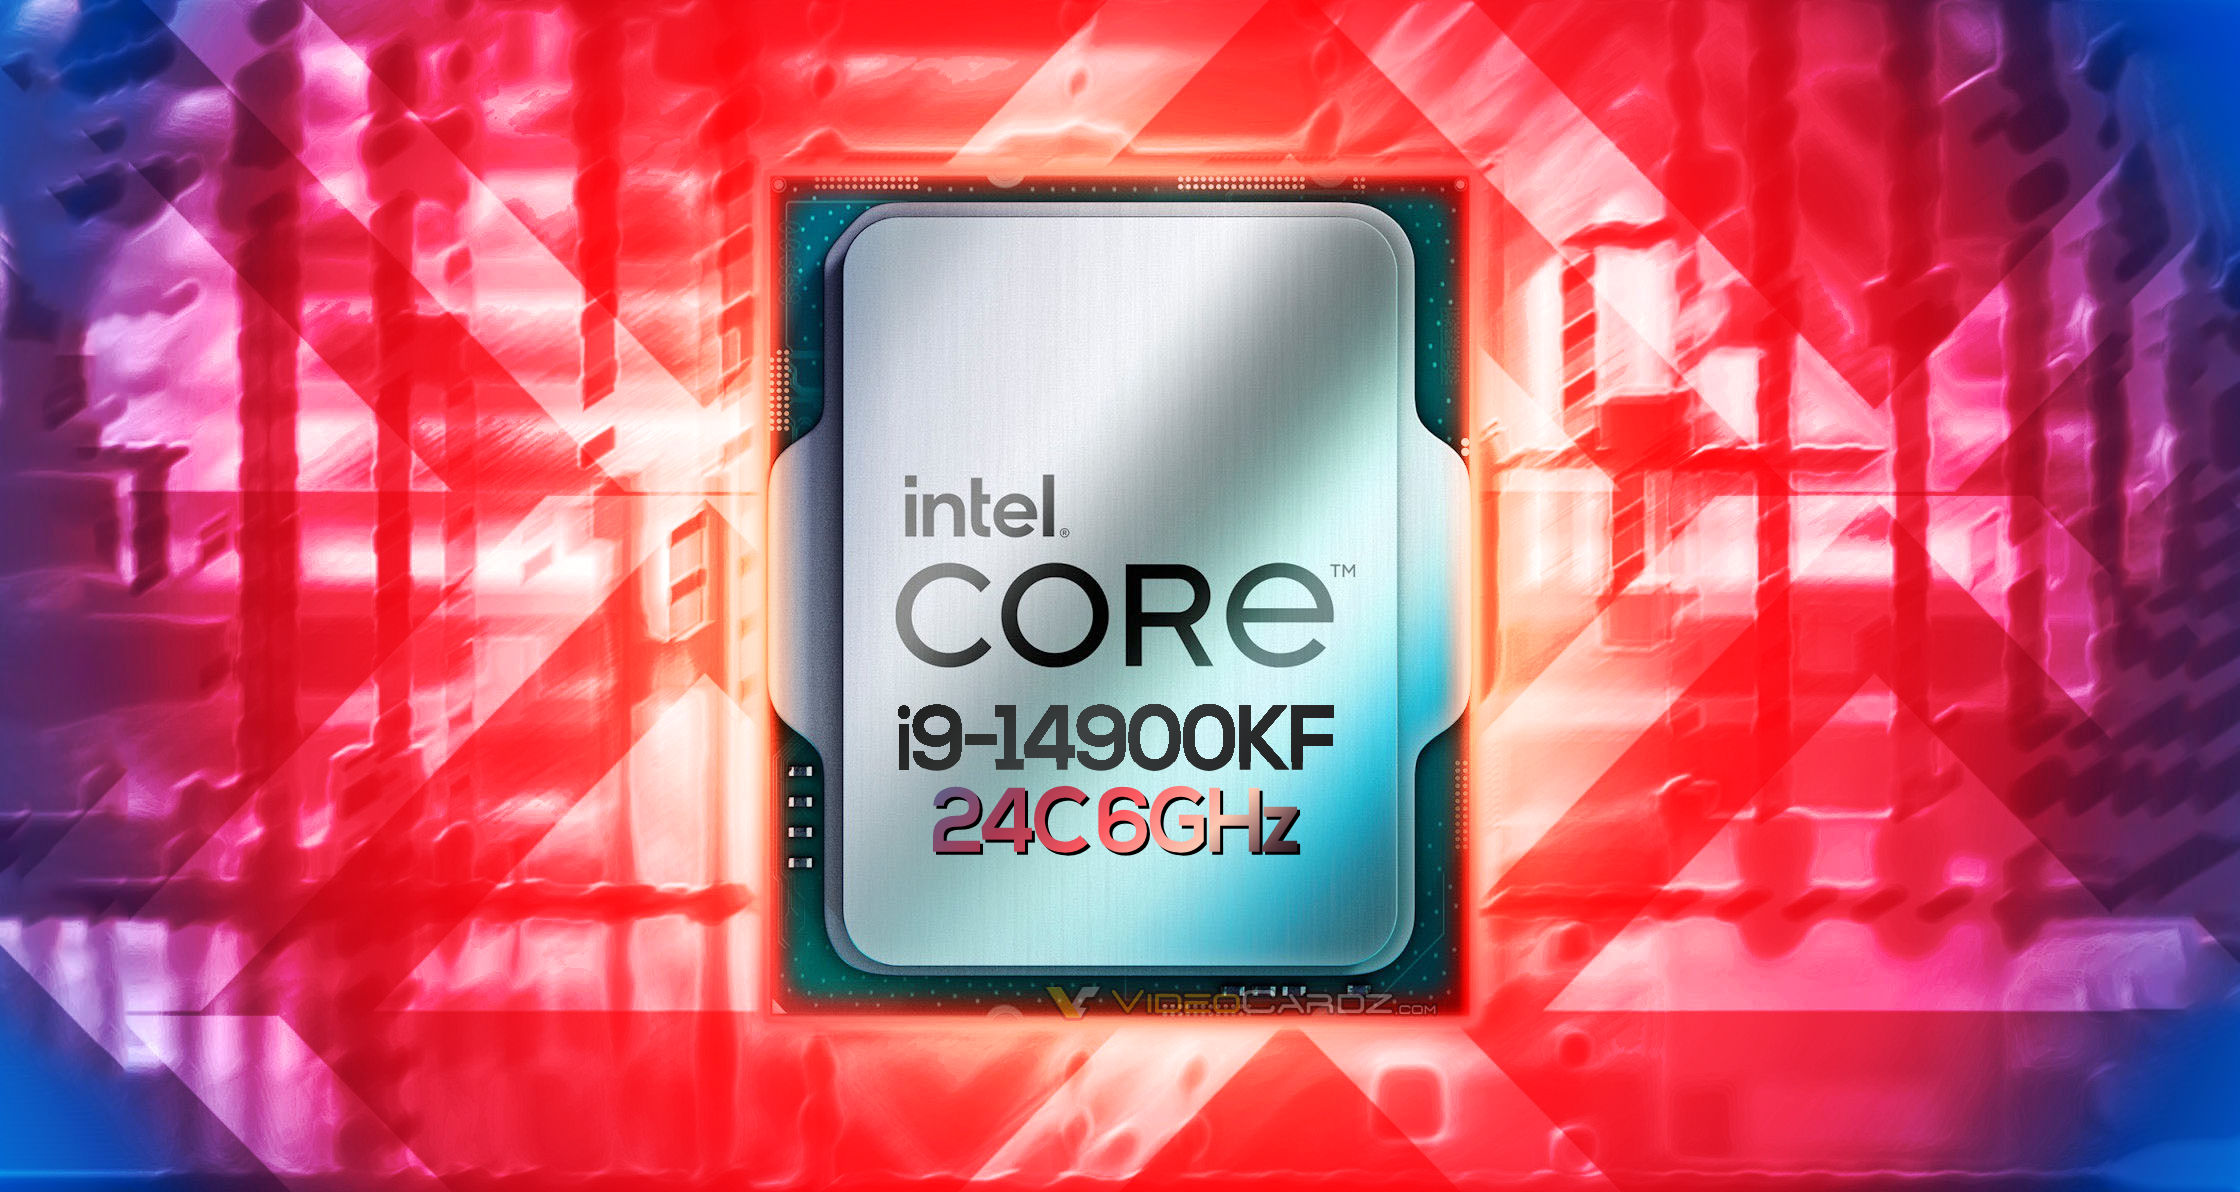 Intel's upcoming Core i9-14900KF 24-core and 6GHz CPU shows up in